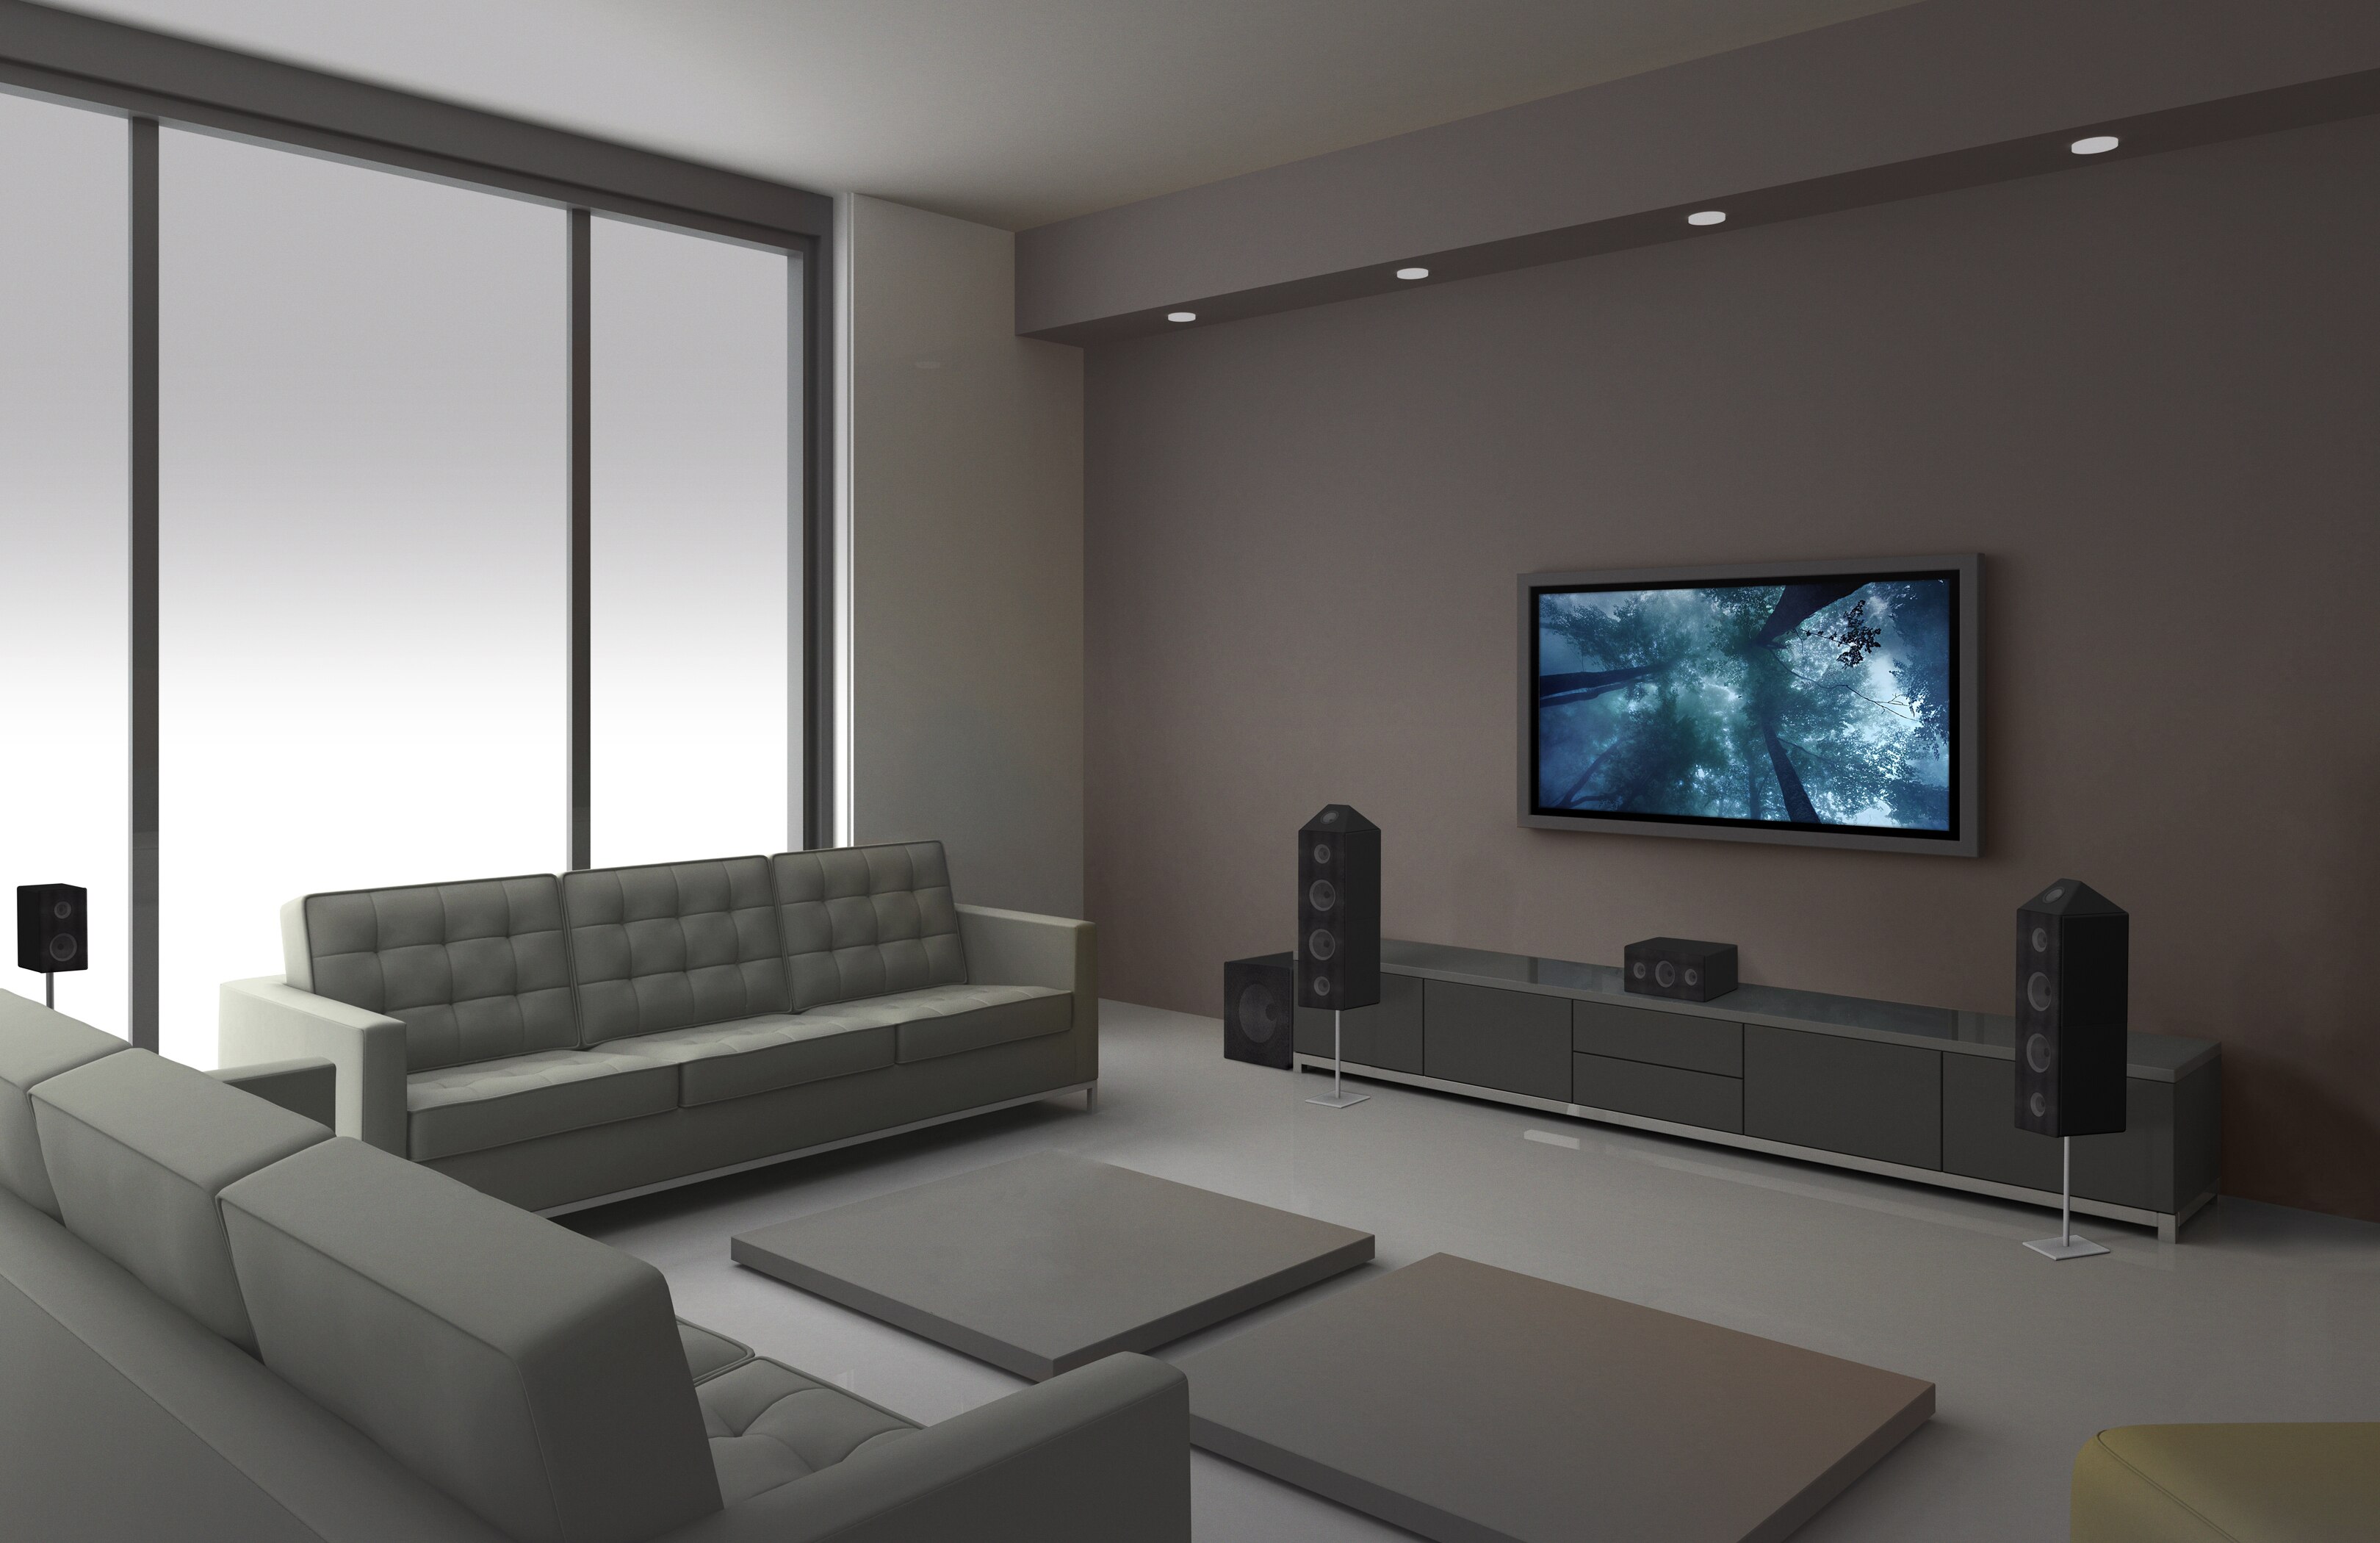 atmos home theatre system